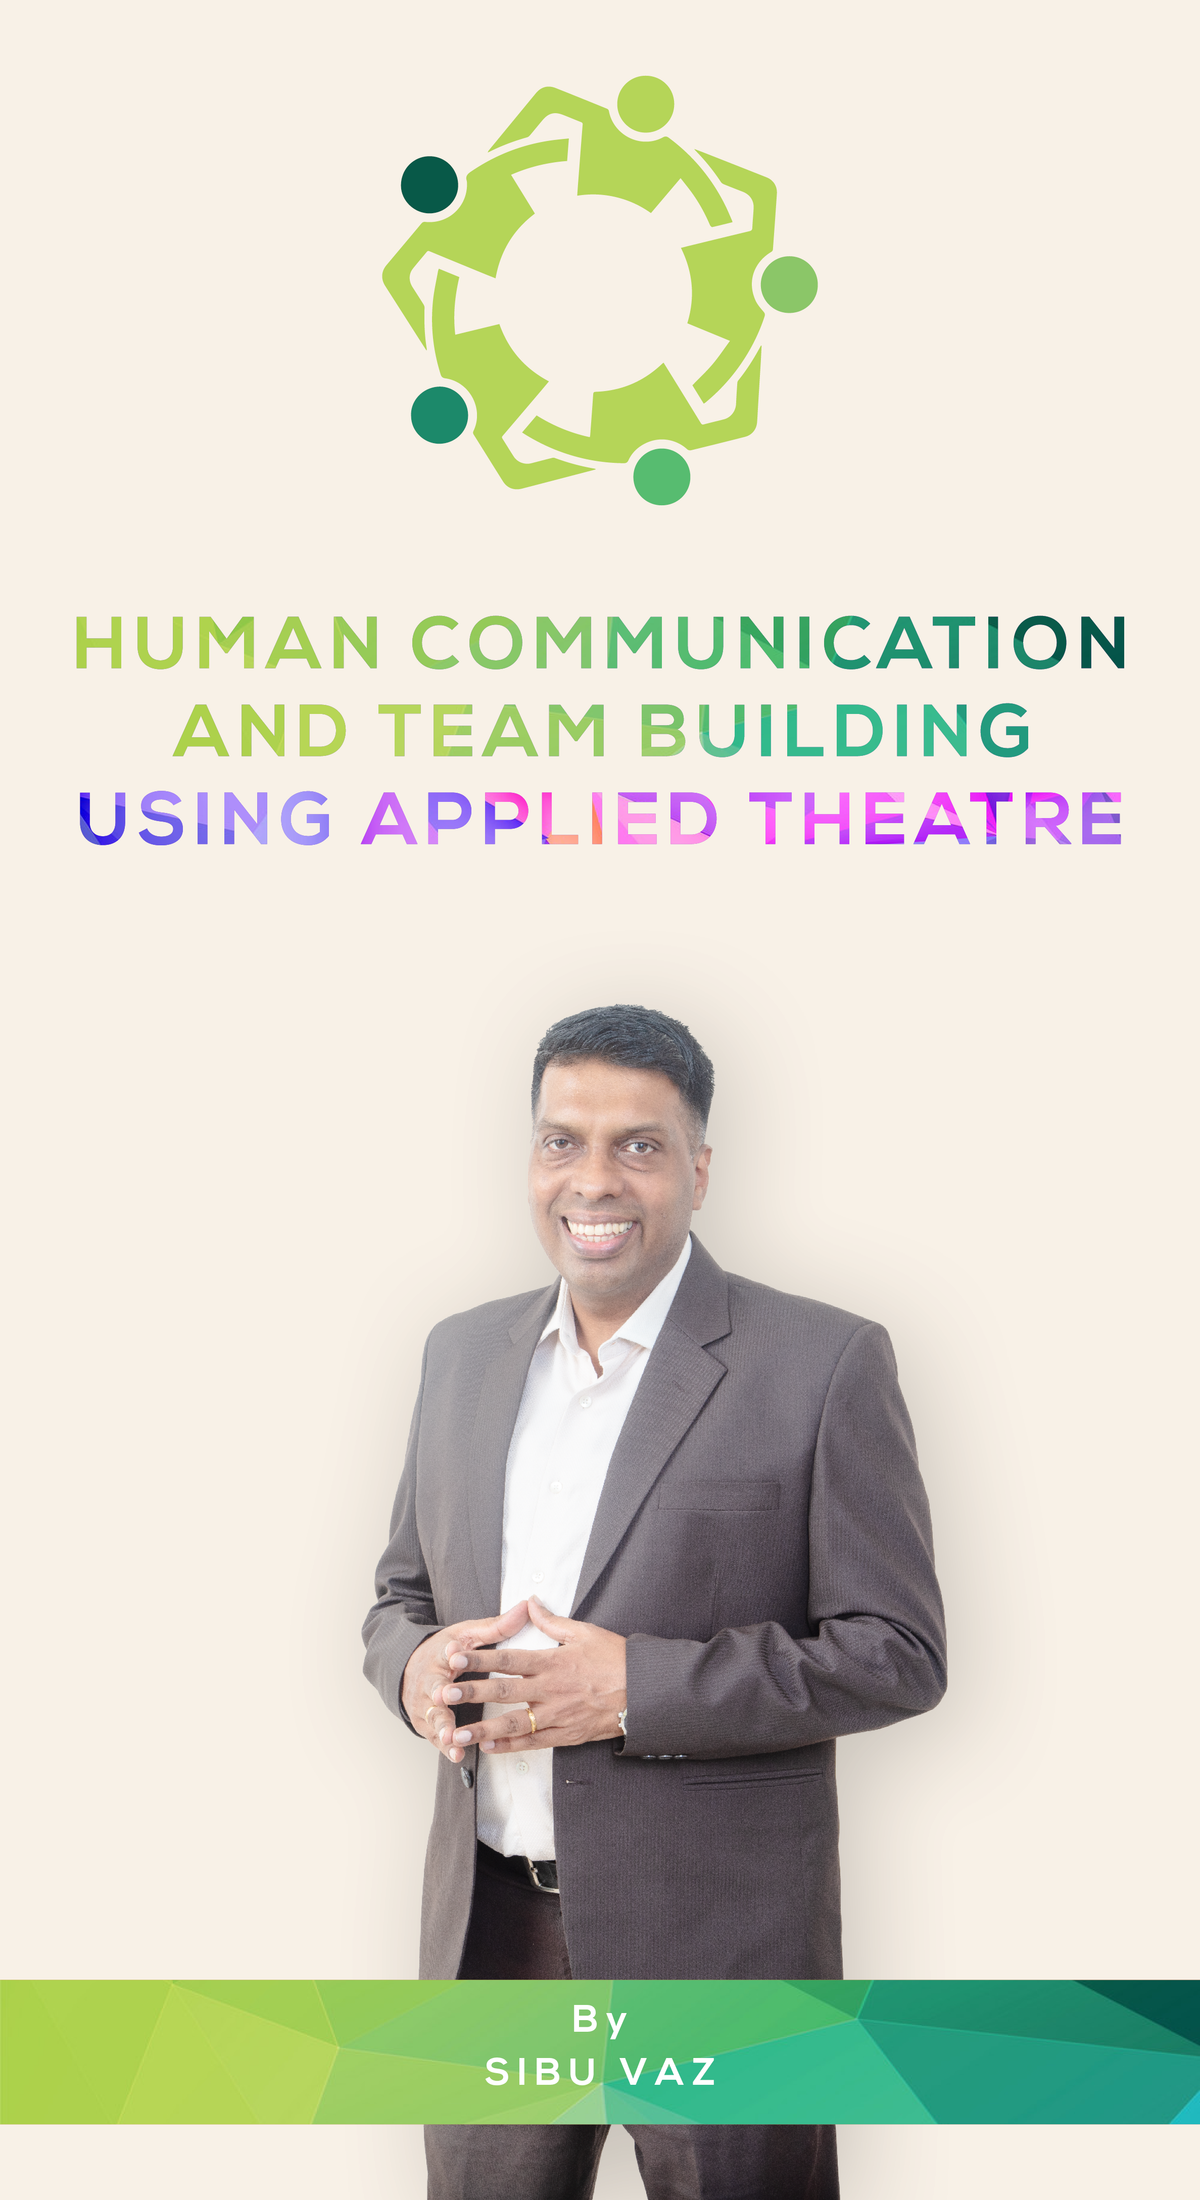 Human communication and team building using applied theatre